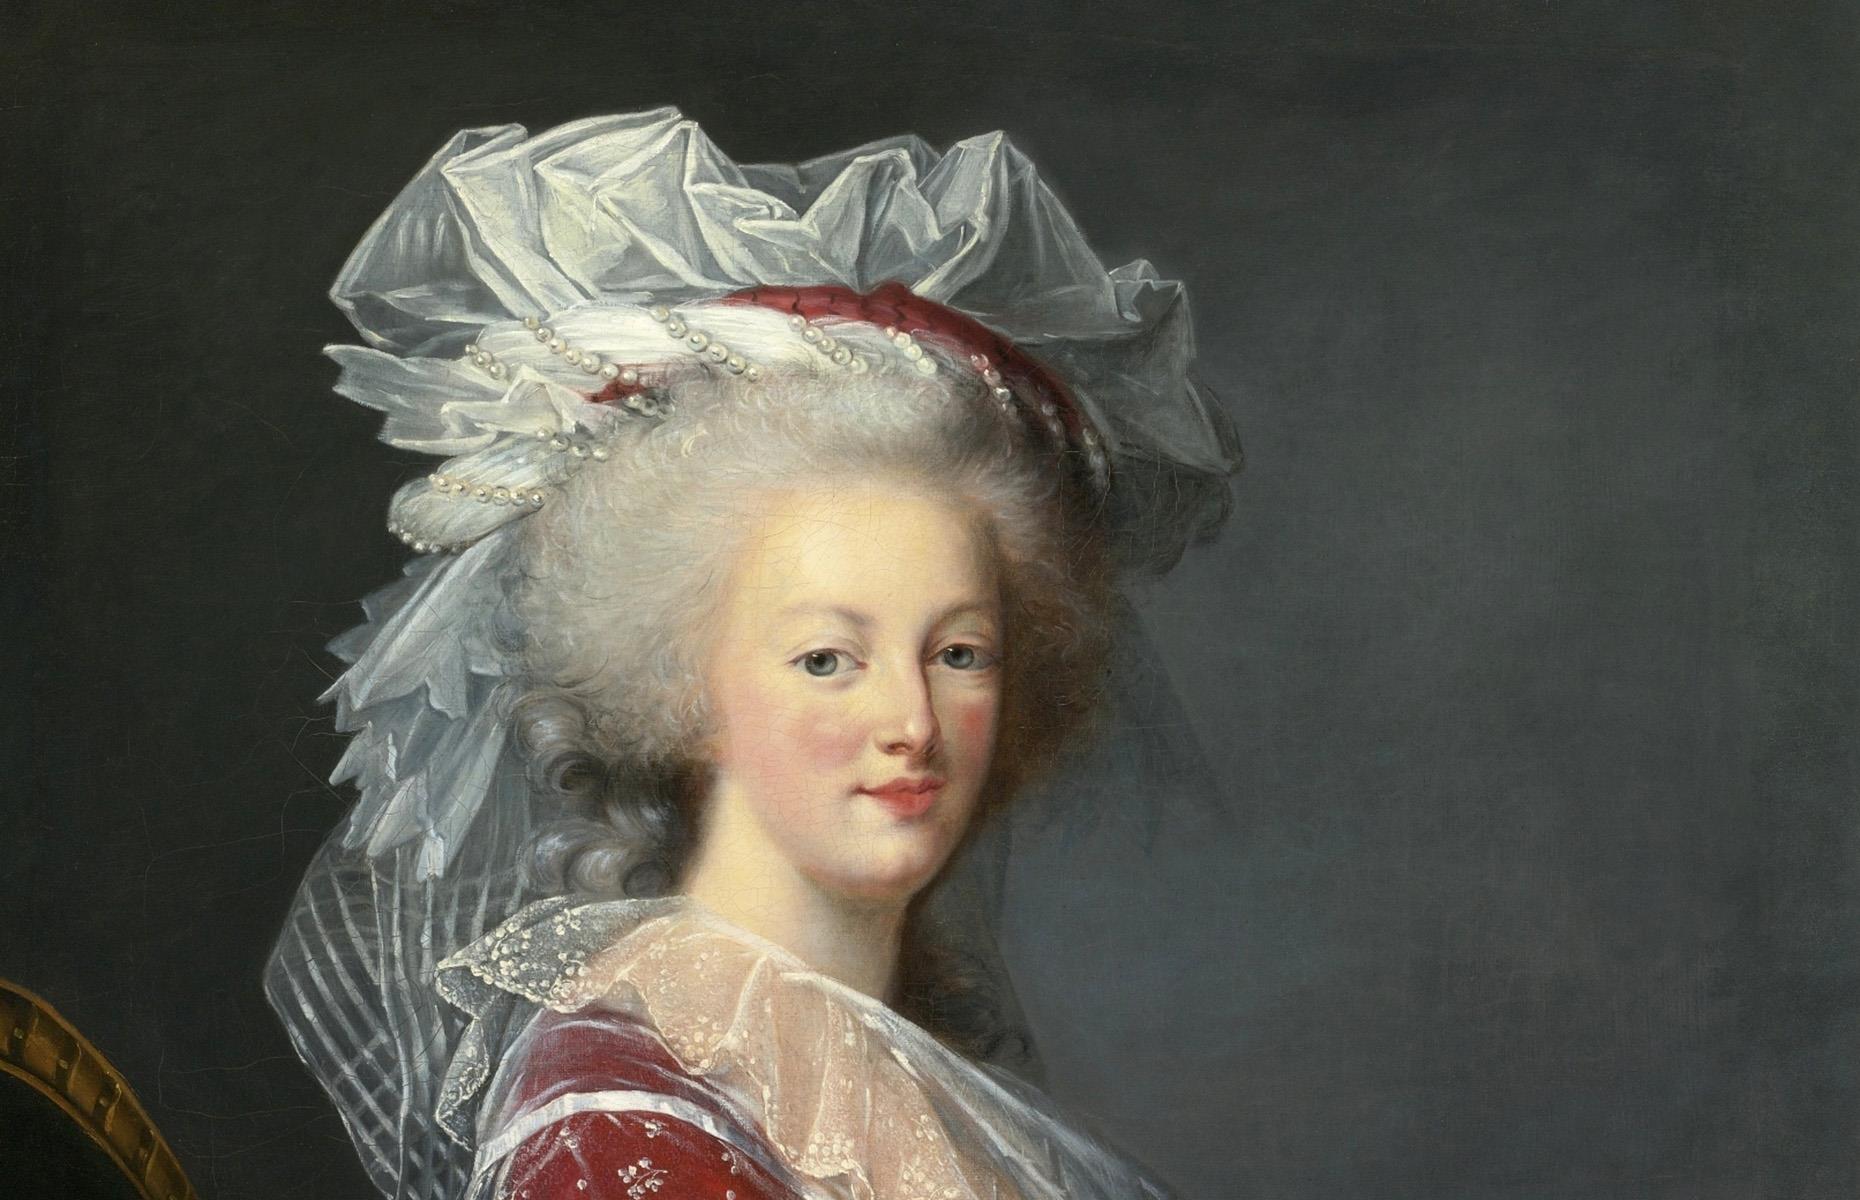 <p>One infamous story claims that when Marie Antoinette was asked what the French people should do if they had no bread to eat, she callously replied: "Let them eat cake."</p>  <p>This anecdote contradicts the queen's charitable nature and is most likely untrue, with the biting quote attributed to several other historical figures instead.</p>  <p>It was speculation like this, however, that played a part in fueling the French people's bloody revolt against the royals.</p>